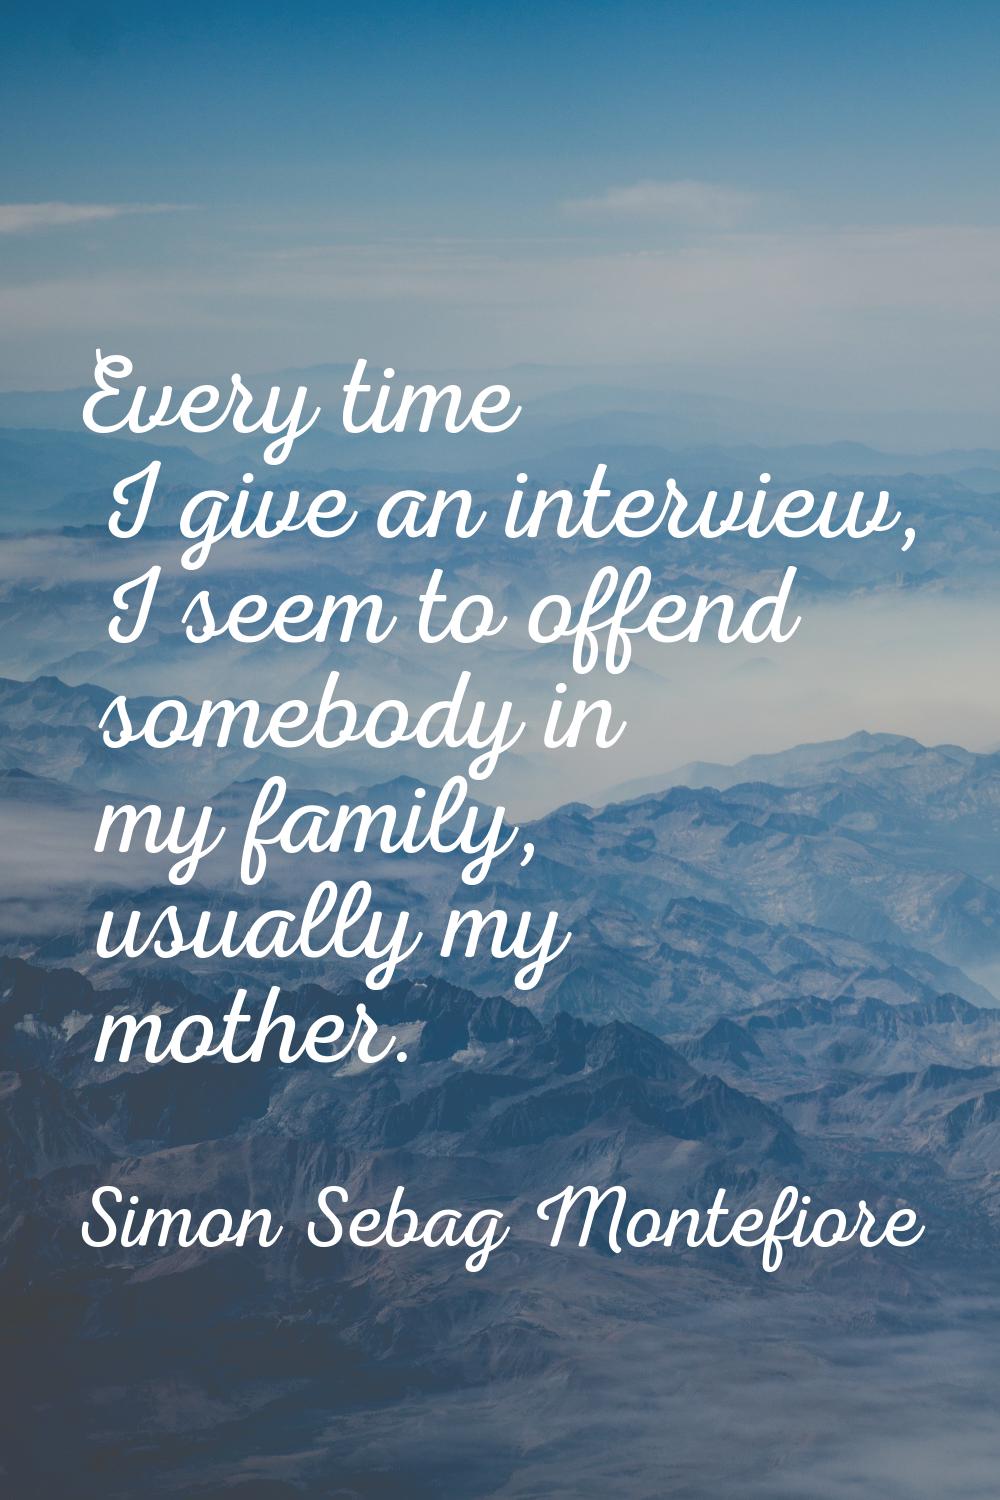 Every time I give an interview, I seem to offend somebody in my family, usually my mother.